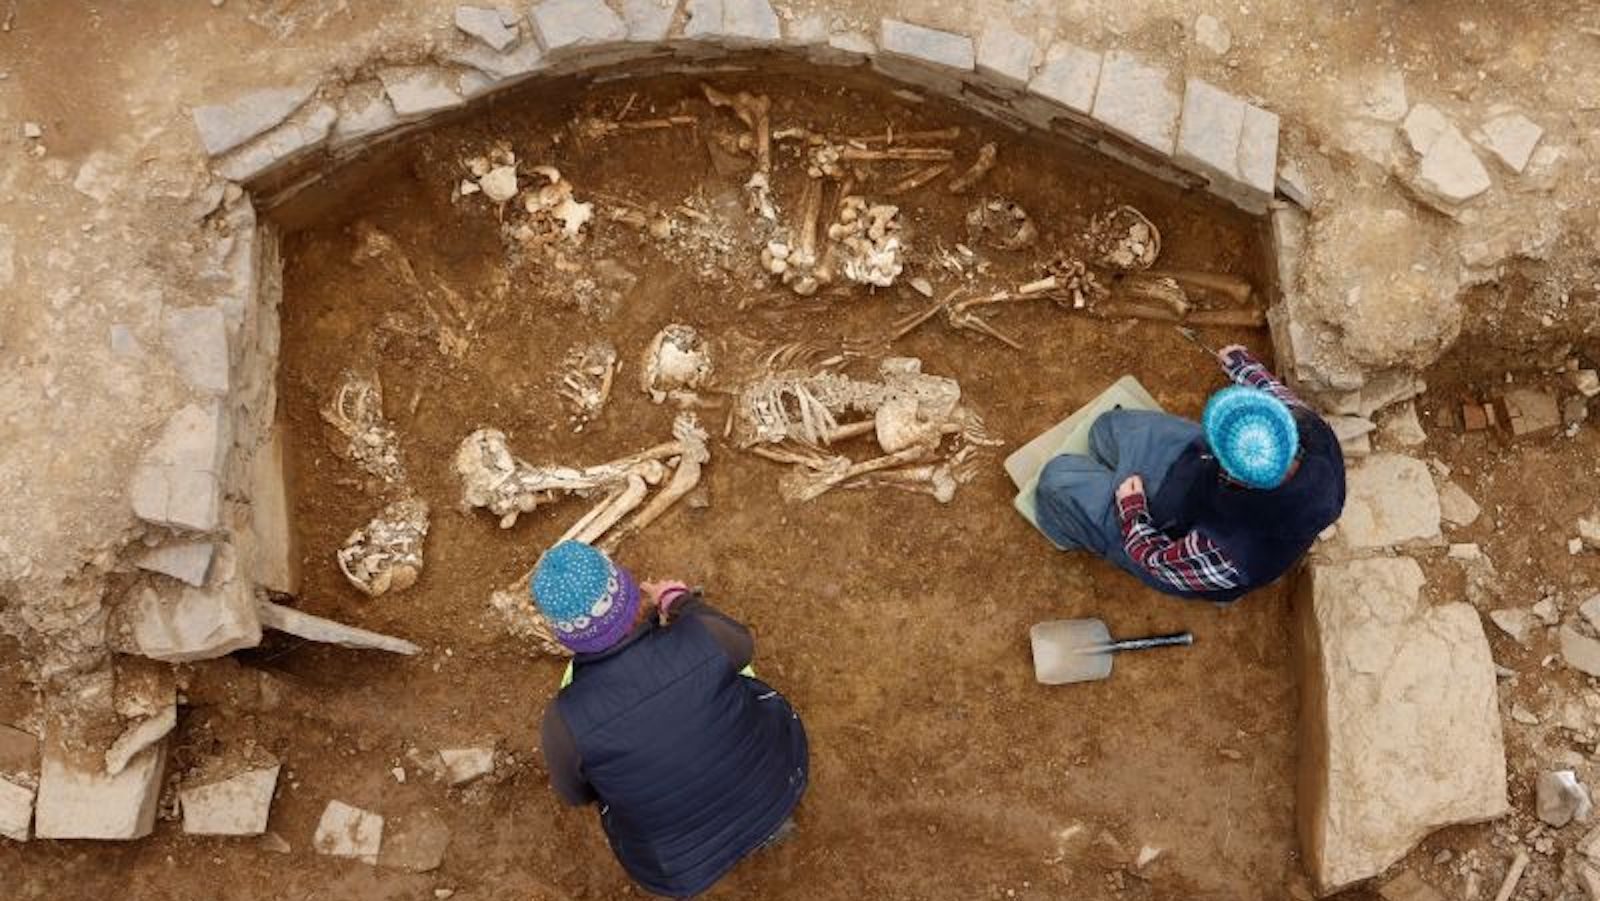 Skeletons found in 5,000-year-old Scottish cemetery